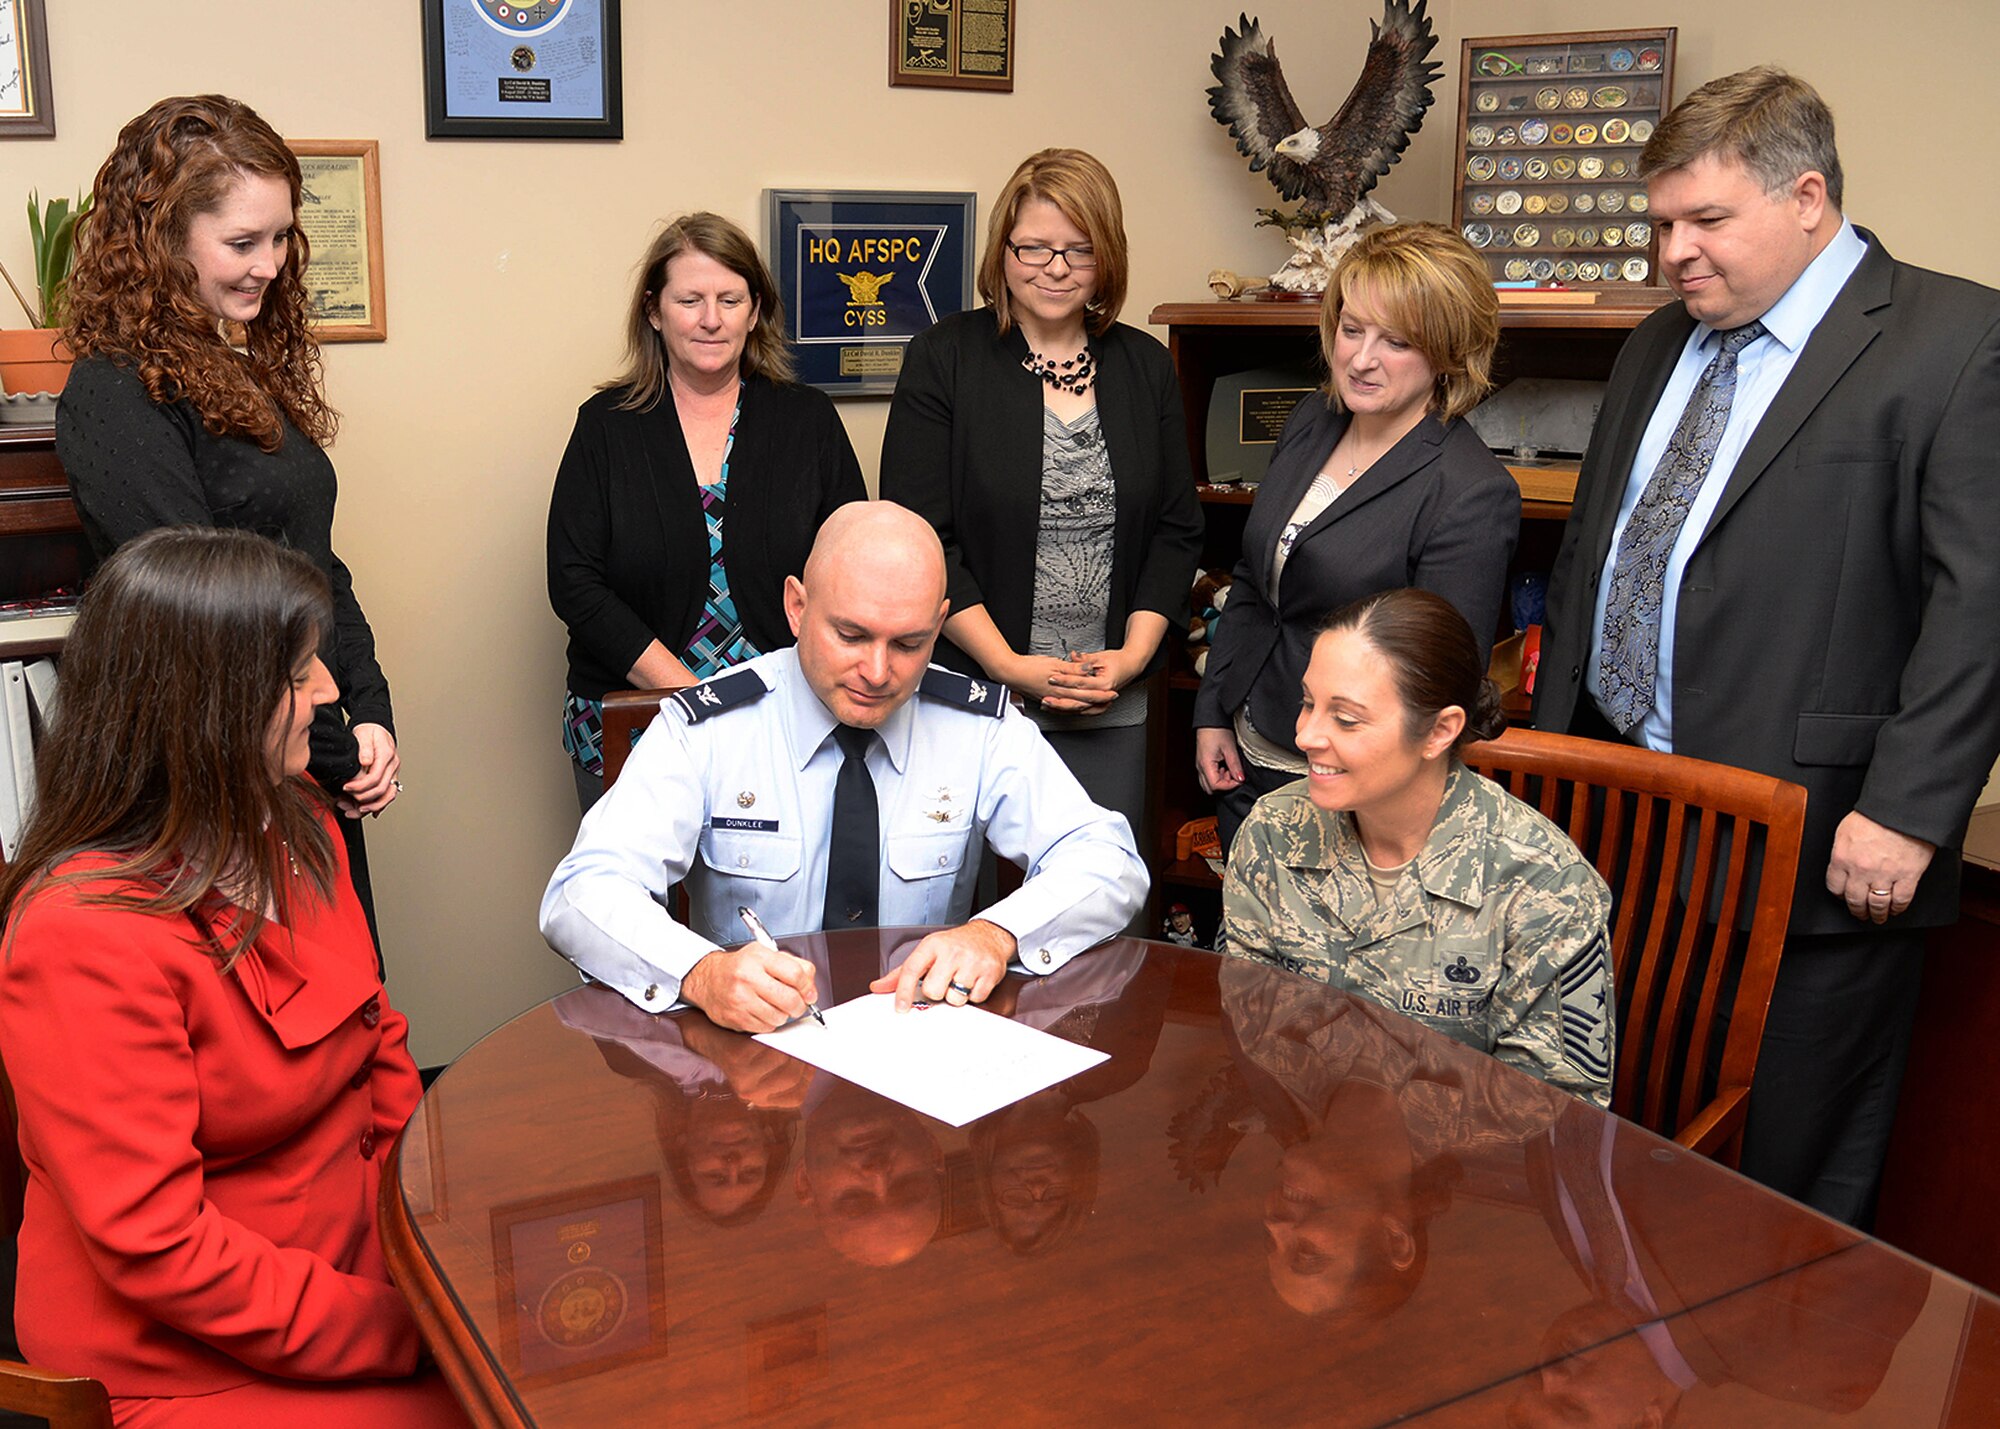 Col. David R. Dunklee, 66th Air Base Group commander, signs a Women's History Month proclamation in his office Feb. 29 while Tom Fredericks, right, 66 ABG deputy commander, Command Chief Master Sgt. Patricia L. Hickey, seated right, Barbara Briand, seated left, WHM committee chair, and other committee members look on. The theme for this year's WHM campaign is Honoring Women in Public Service. (U.S. Air Force photo by Linda LaBonte Britt)